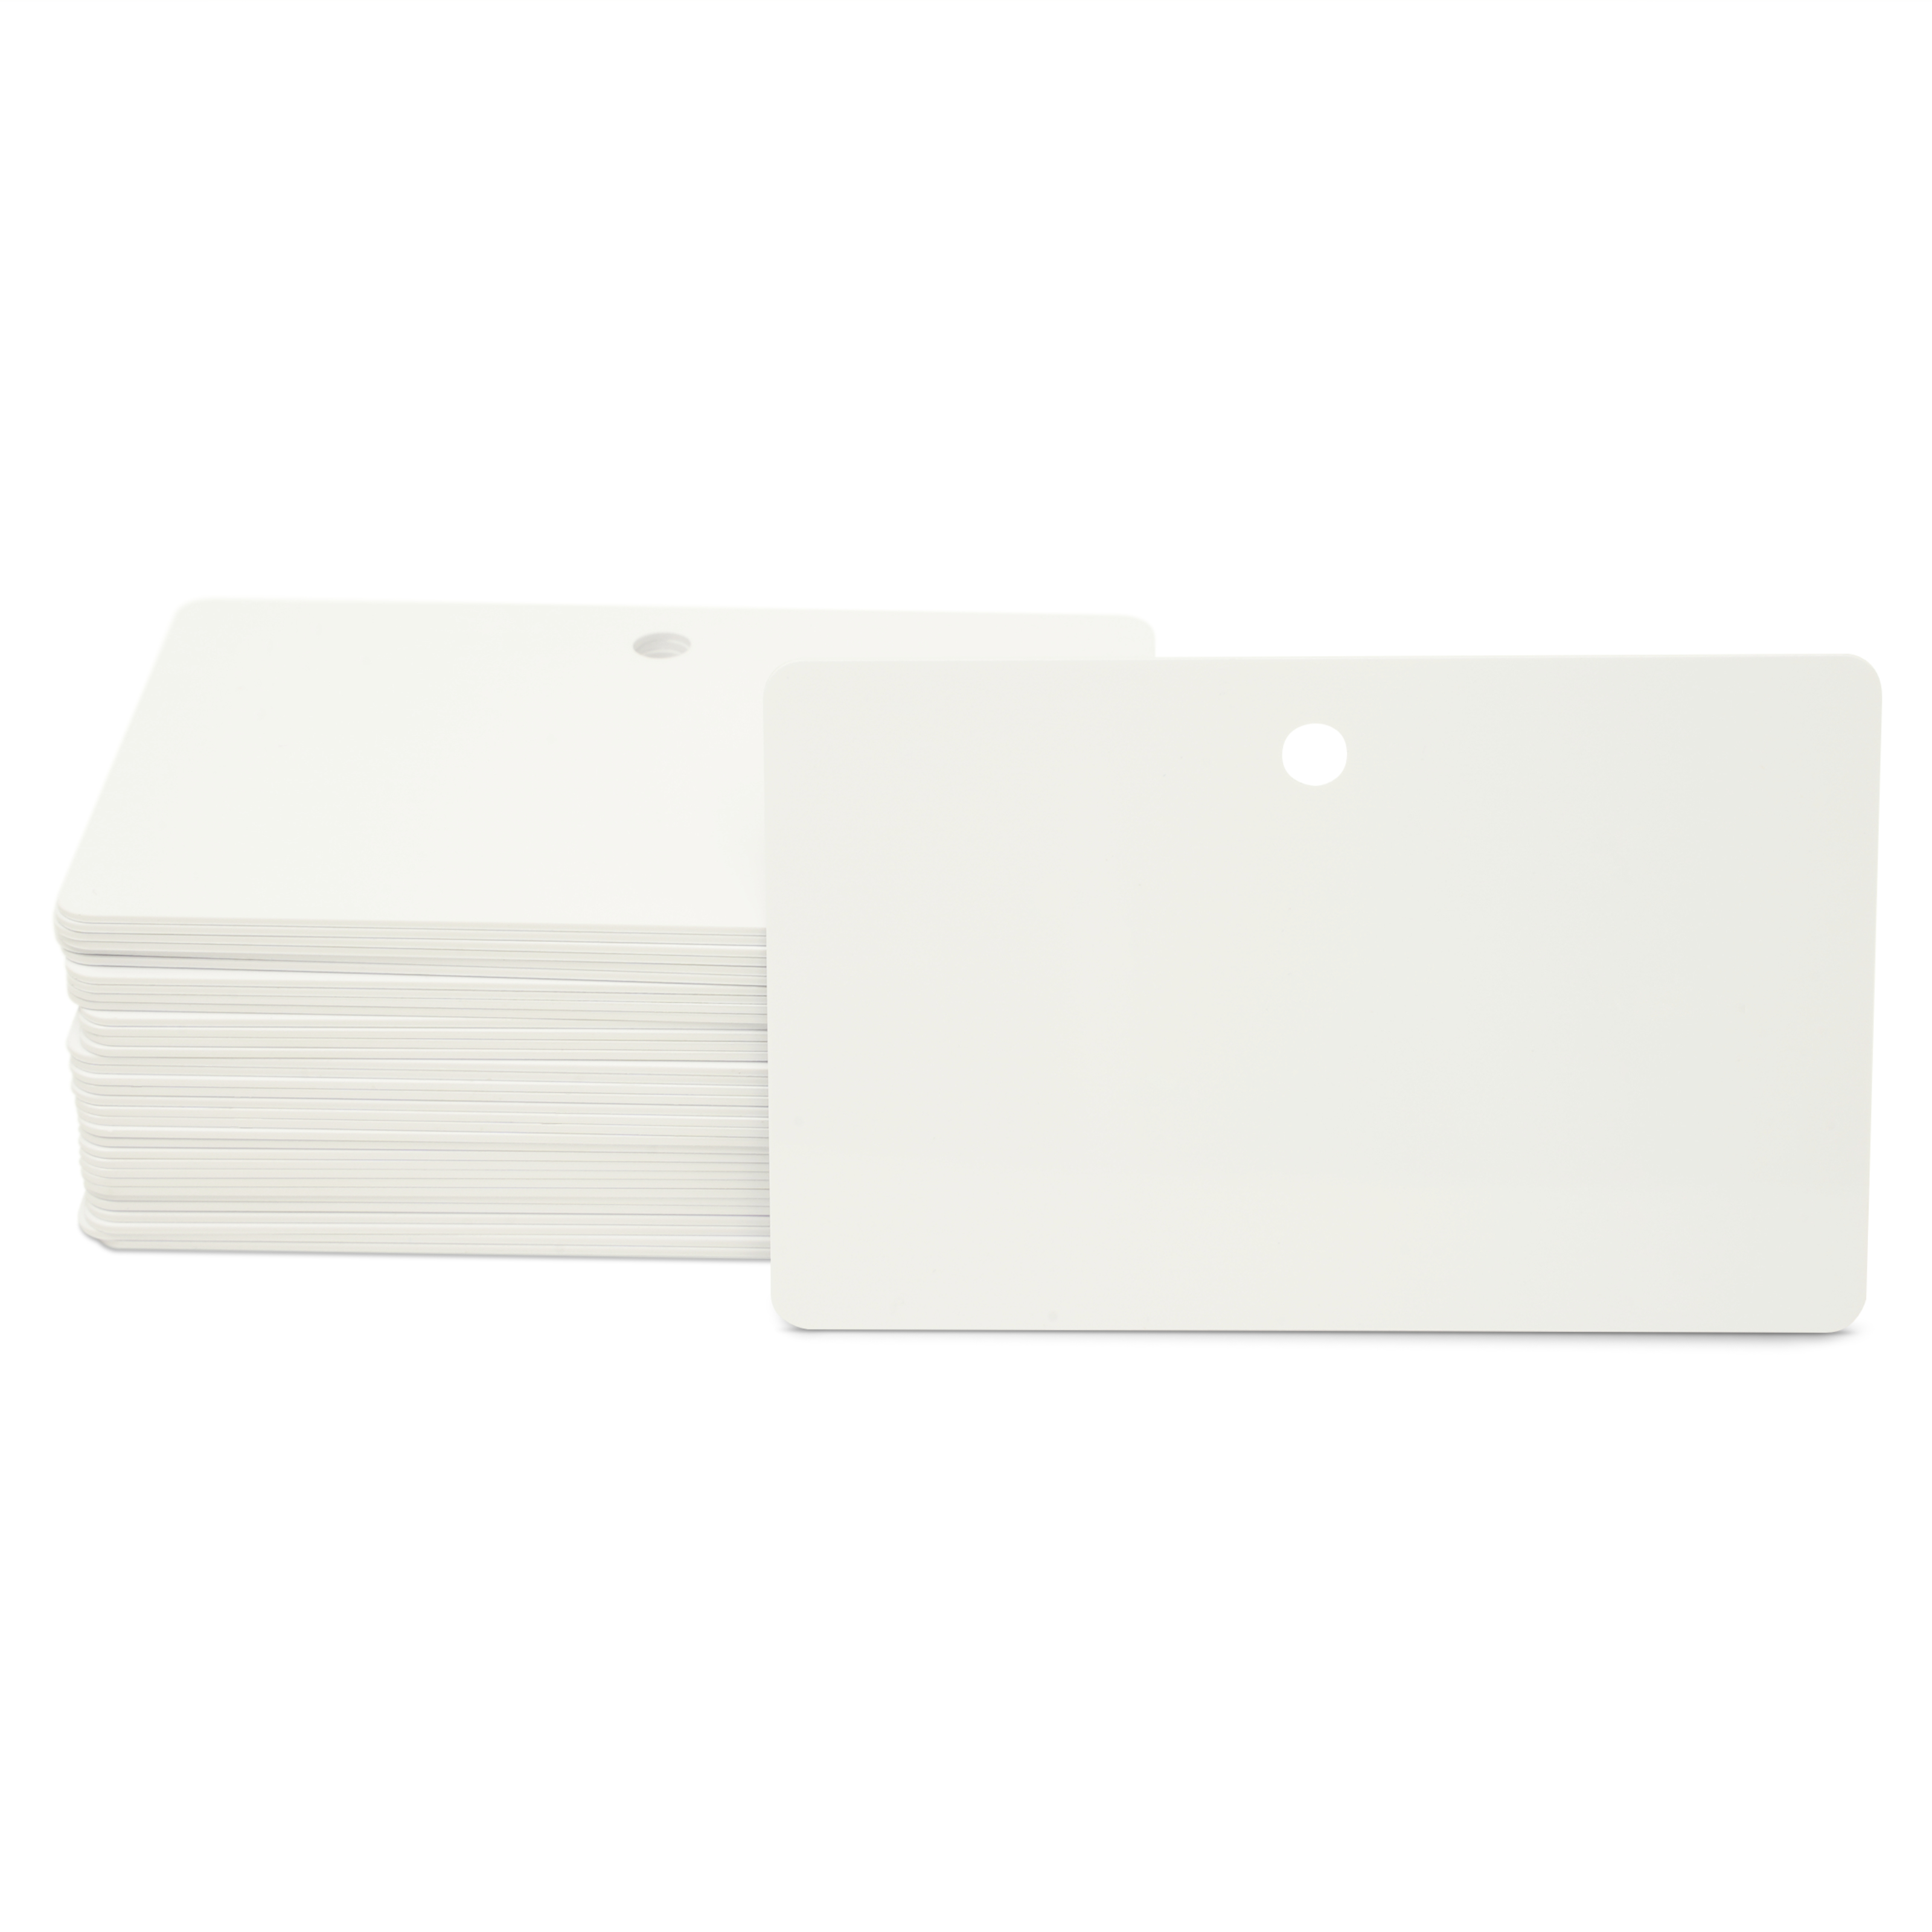 NFC Card PVC - 85,6 x 54 mm - NTAG213 - 180 Byte - white - landscape perforated